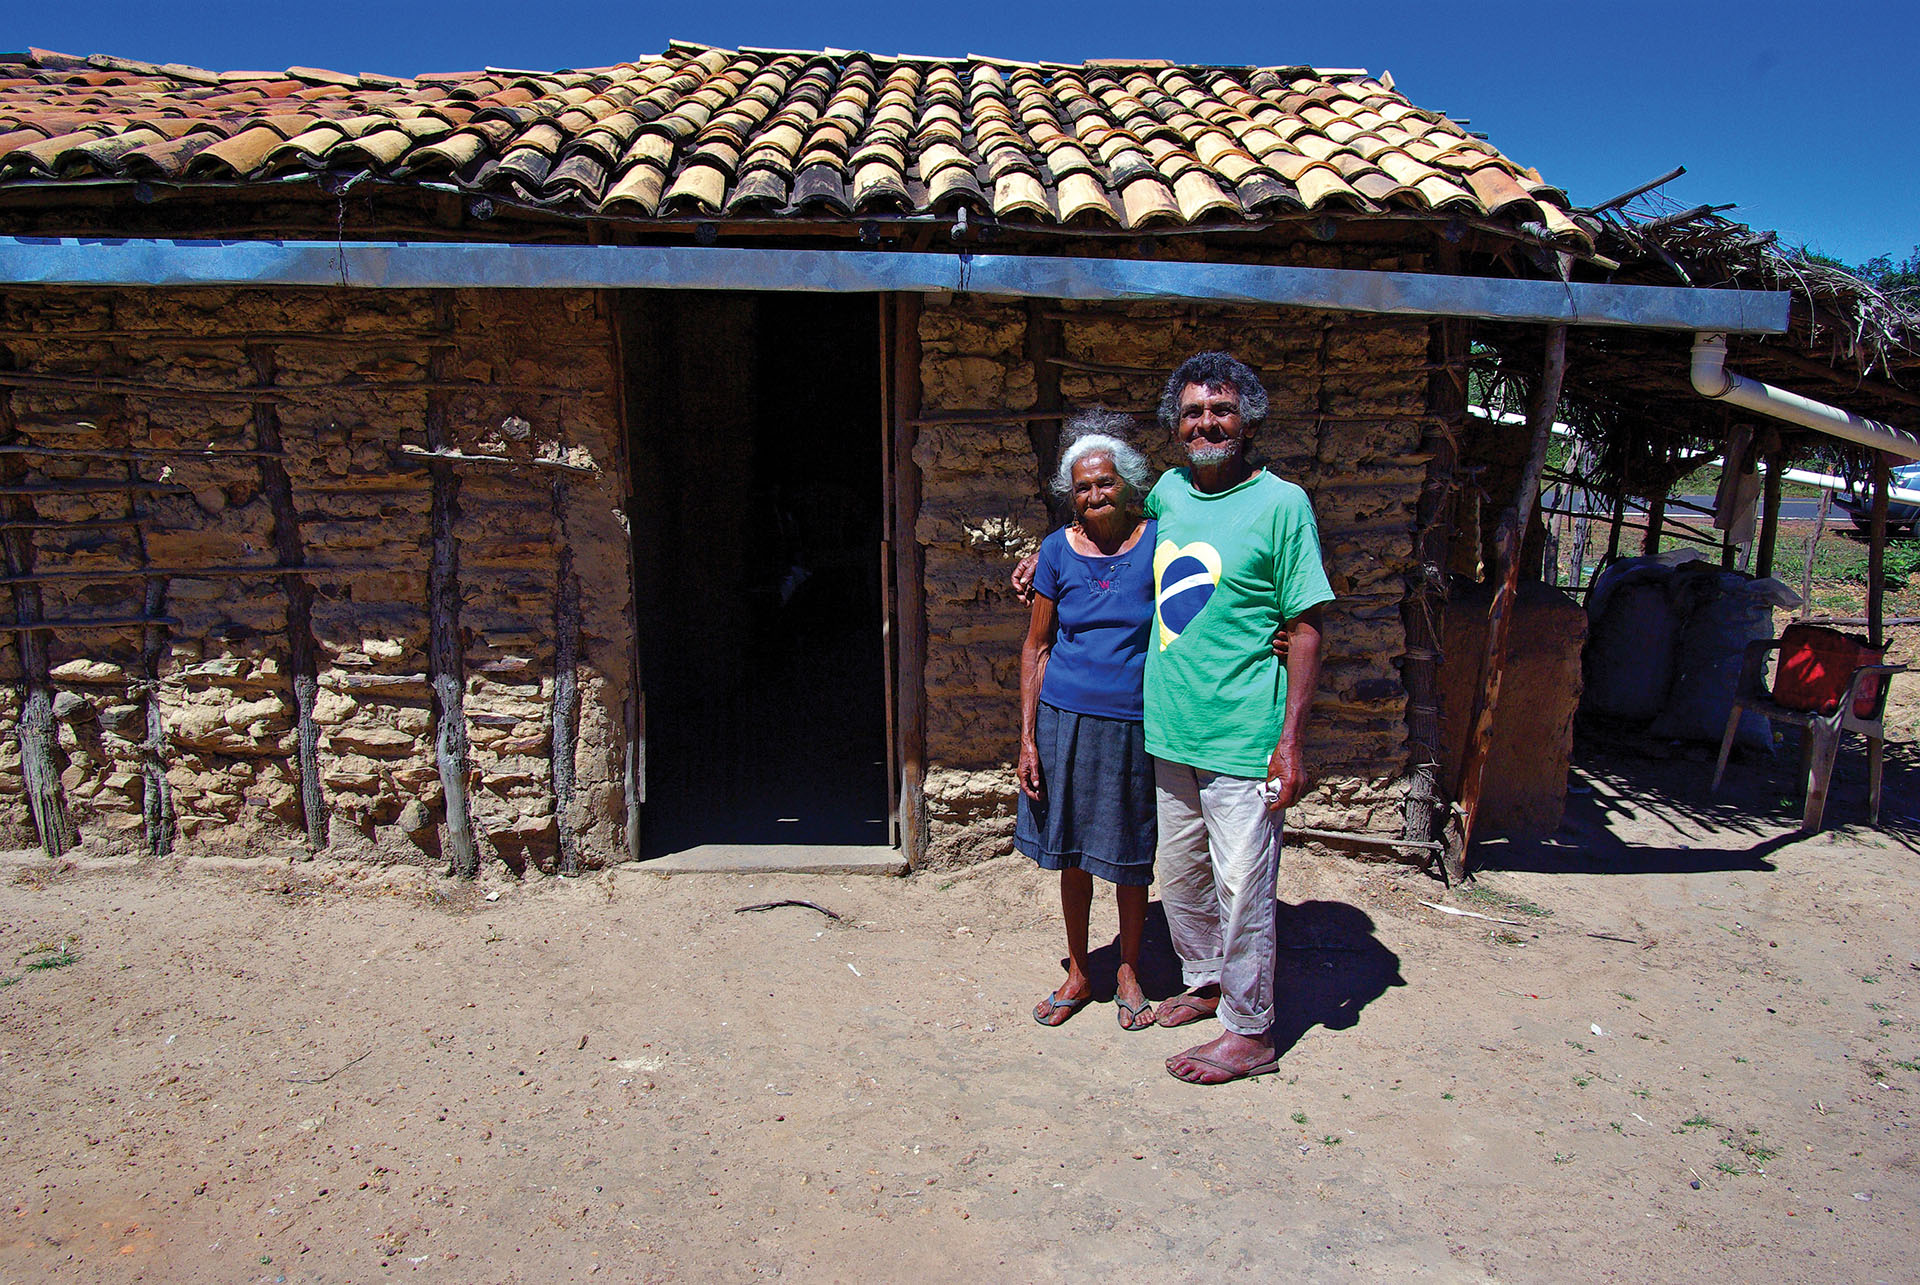 People like this elderly couple standing in front of their home are the beneficiaries of some of Brazil’s social programs. (Photo by Otávio Nogueira.)